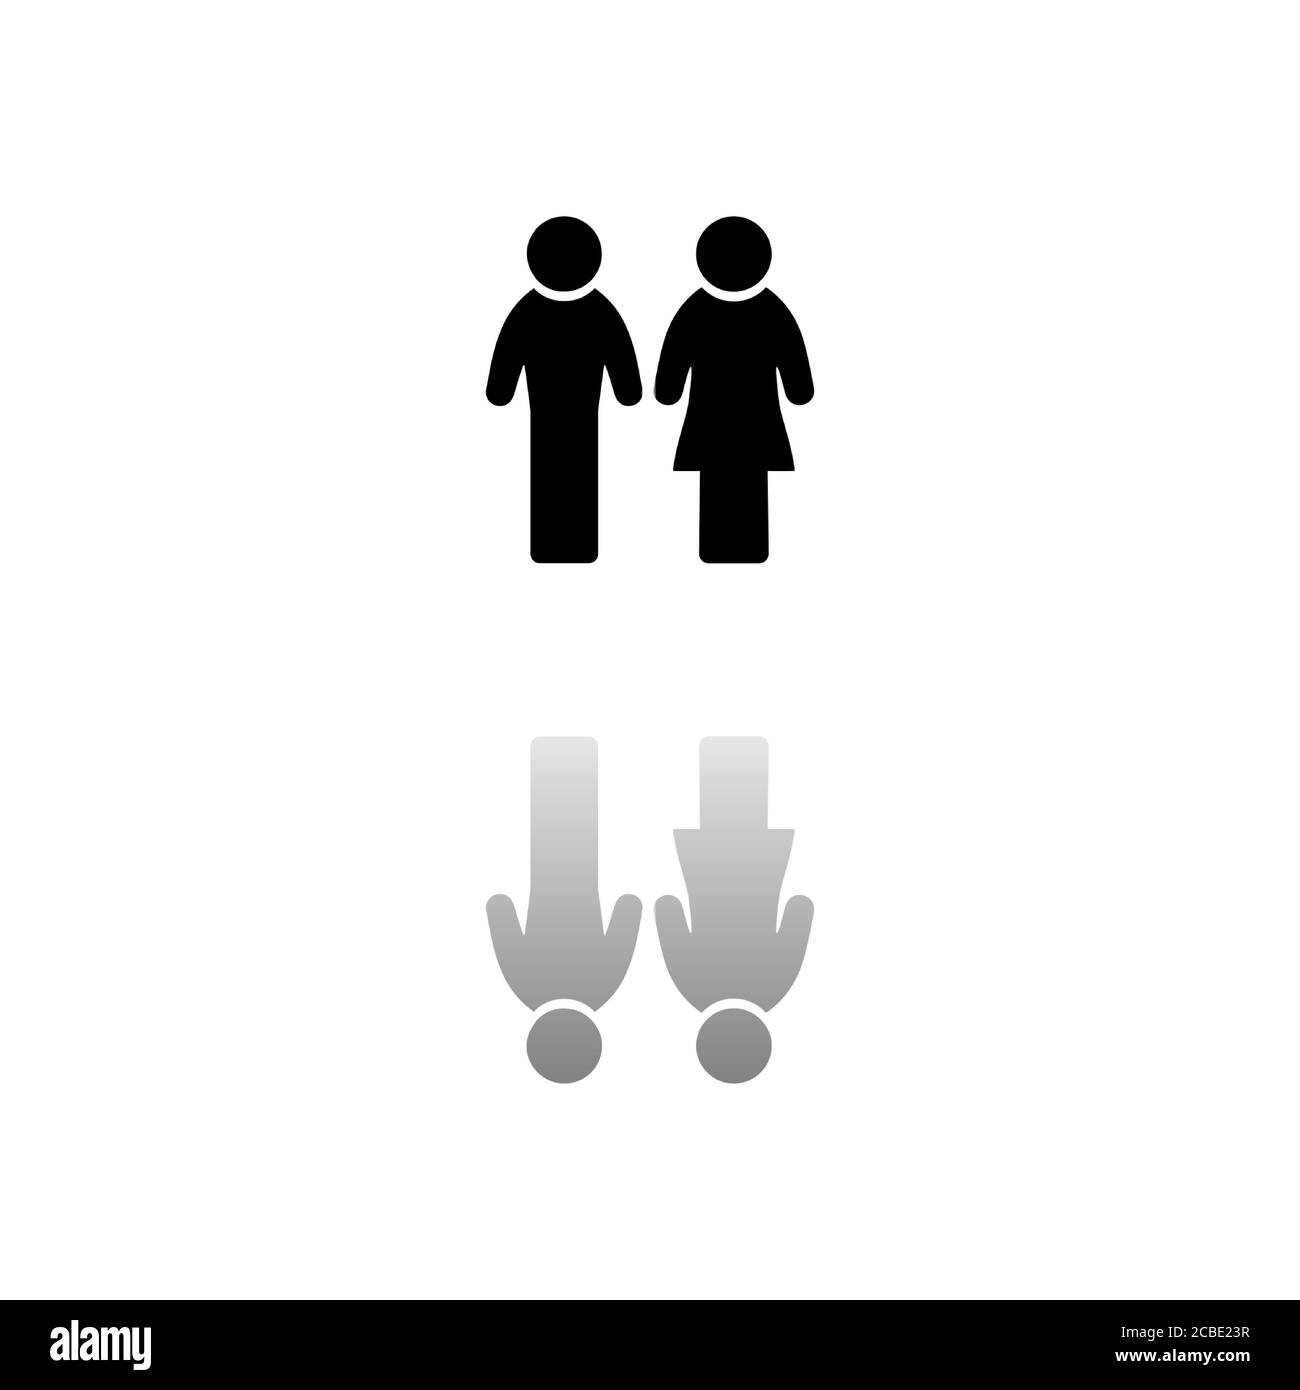 Man and Woman. Black symbol on white background. Simple illustration. Flat Vector Icon. Mirror Reflection Shadow. Can be used in logo, web, mobile and Stock Vector